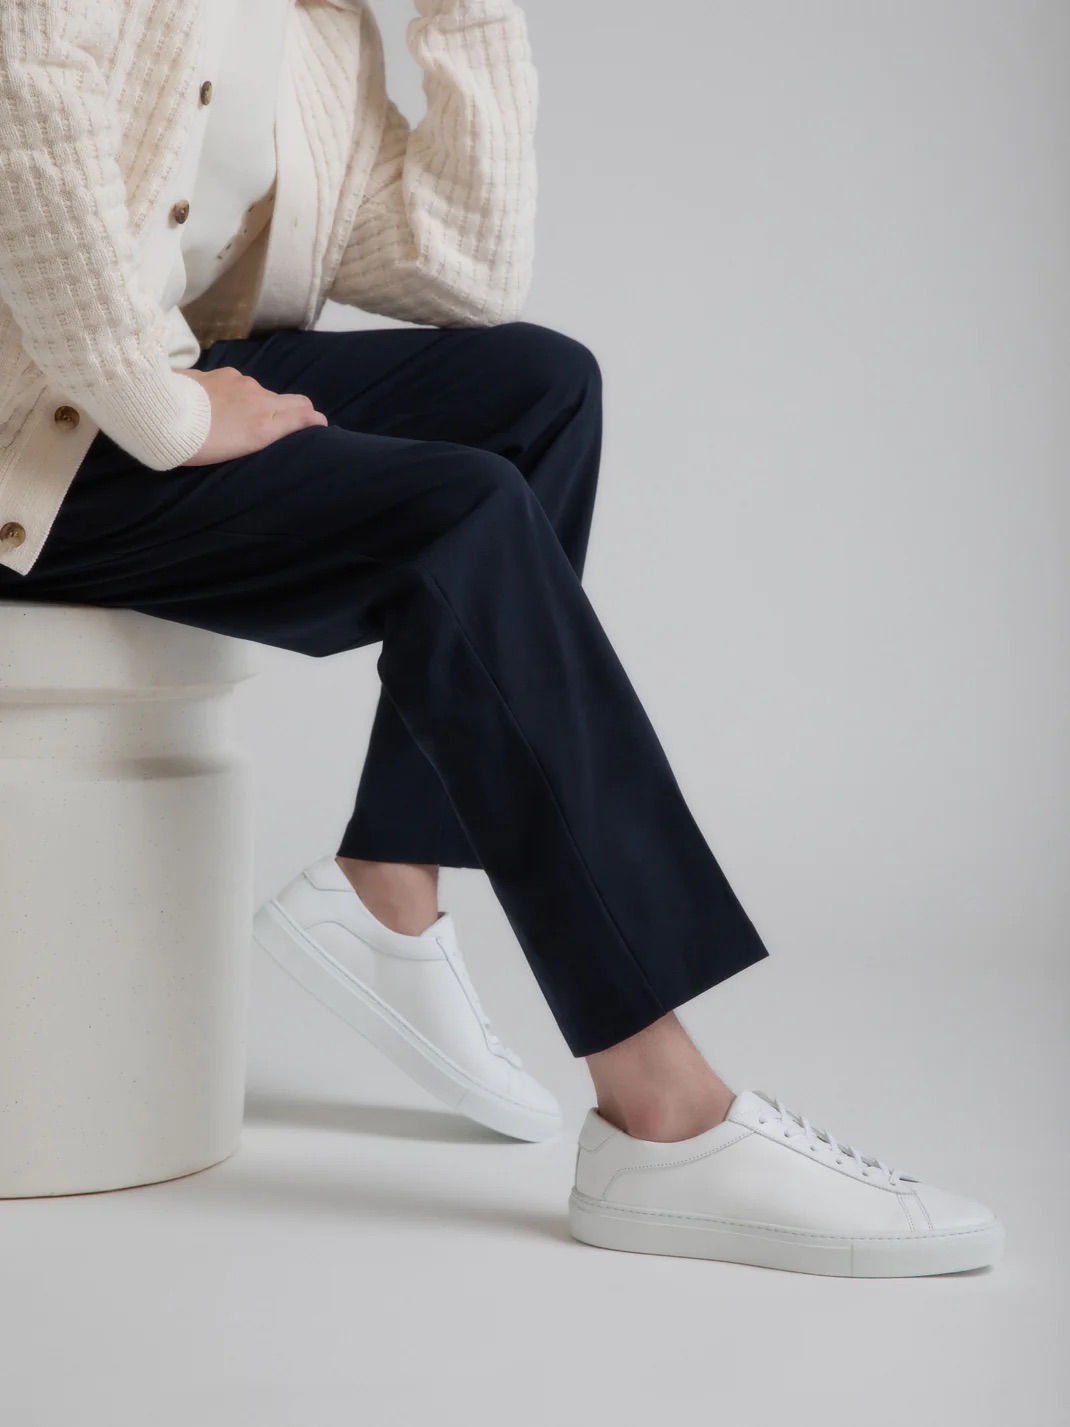 A person seated on a white stool wearing a cream jacket, navy trousers, and white sneakers. only the lower half of the body is visible.